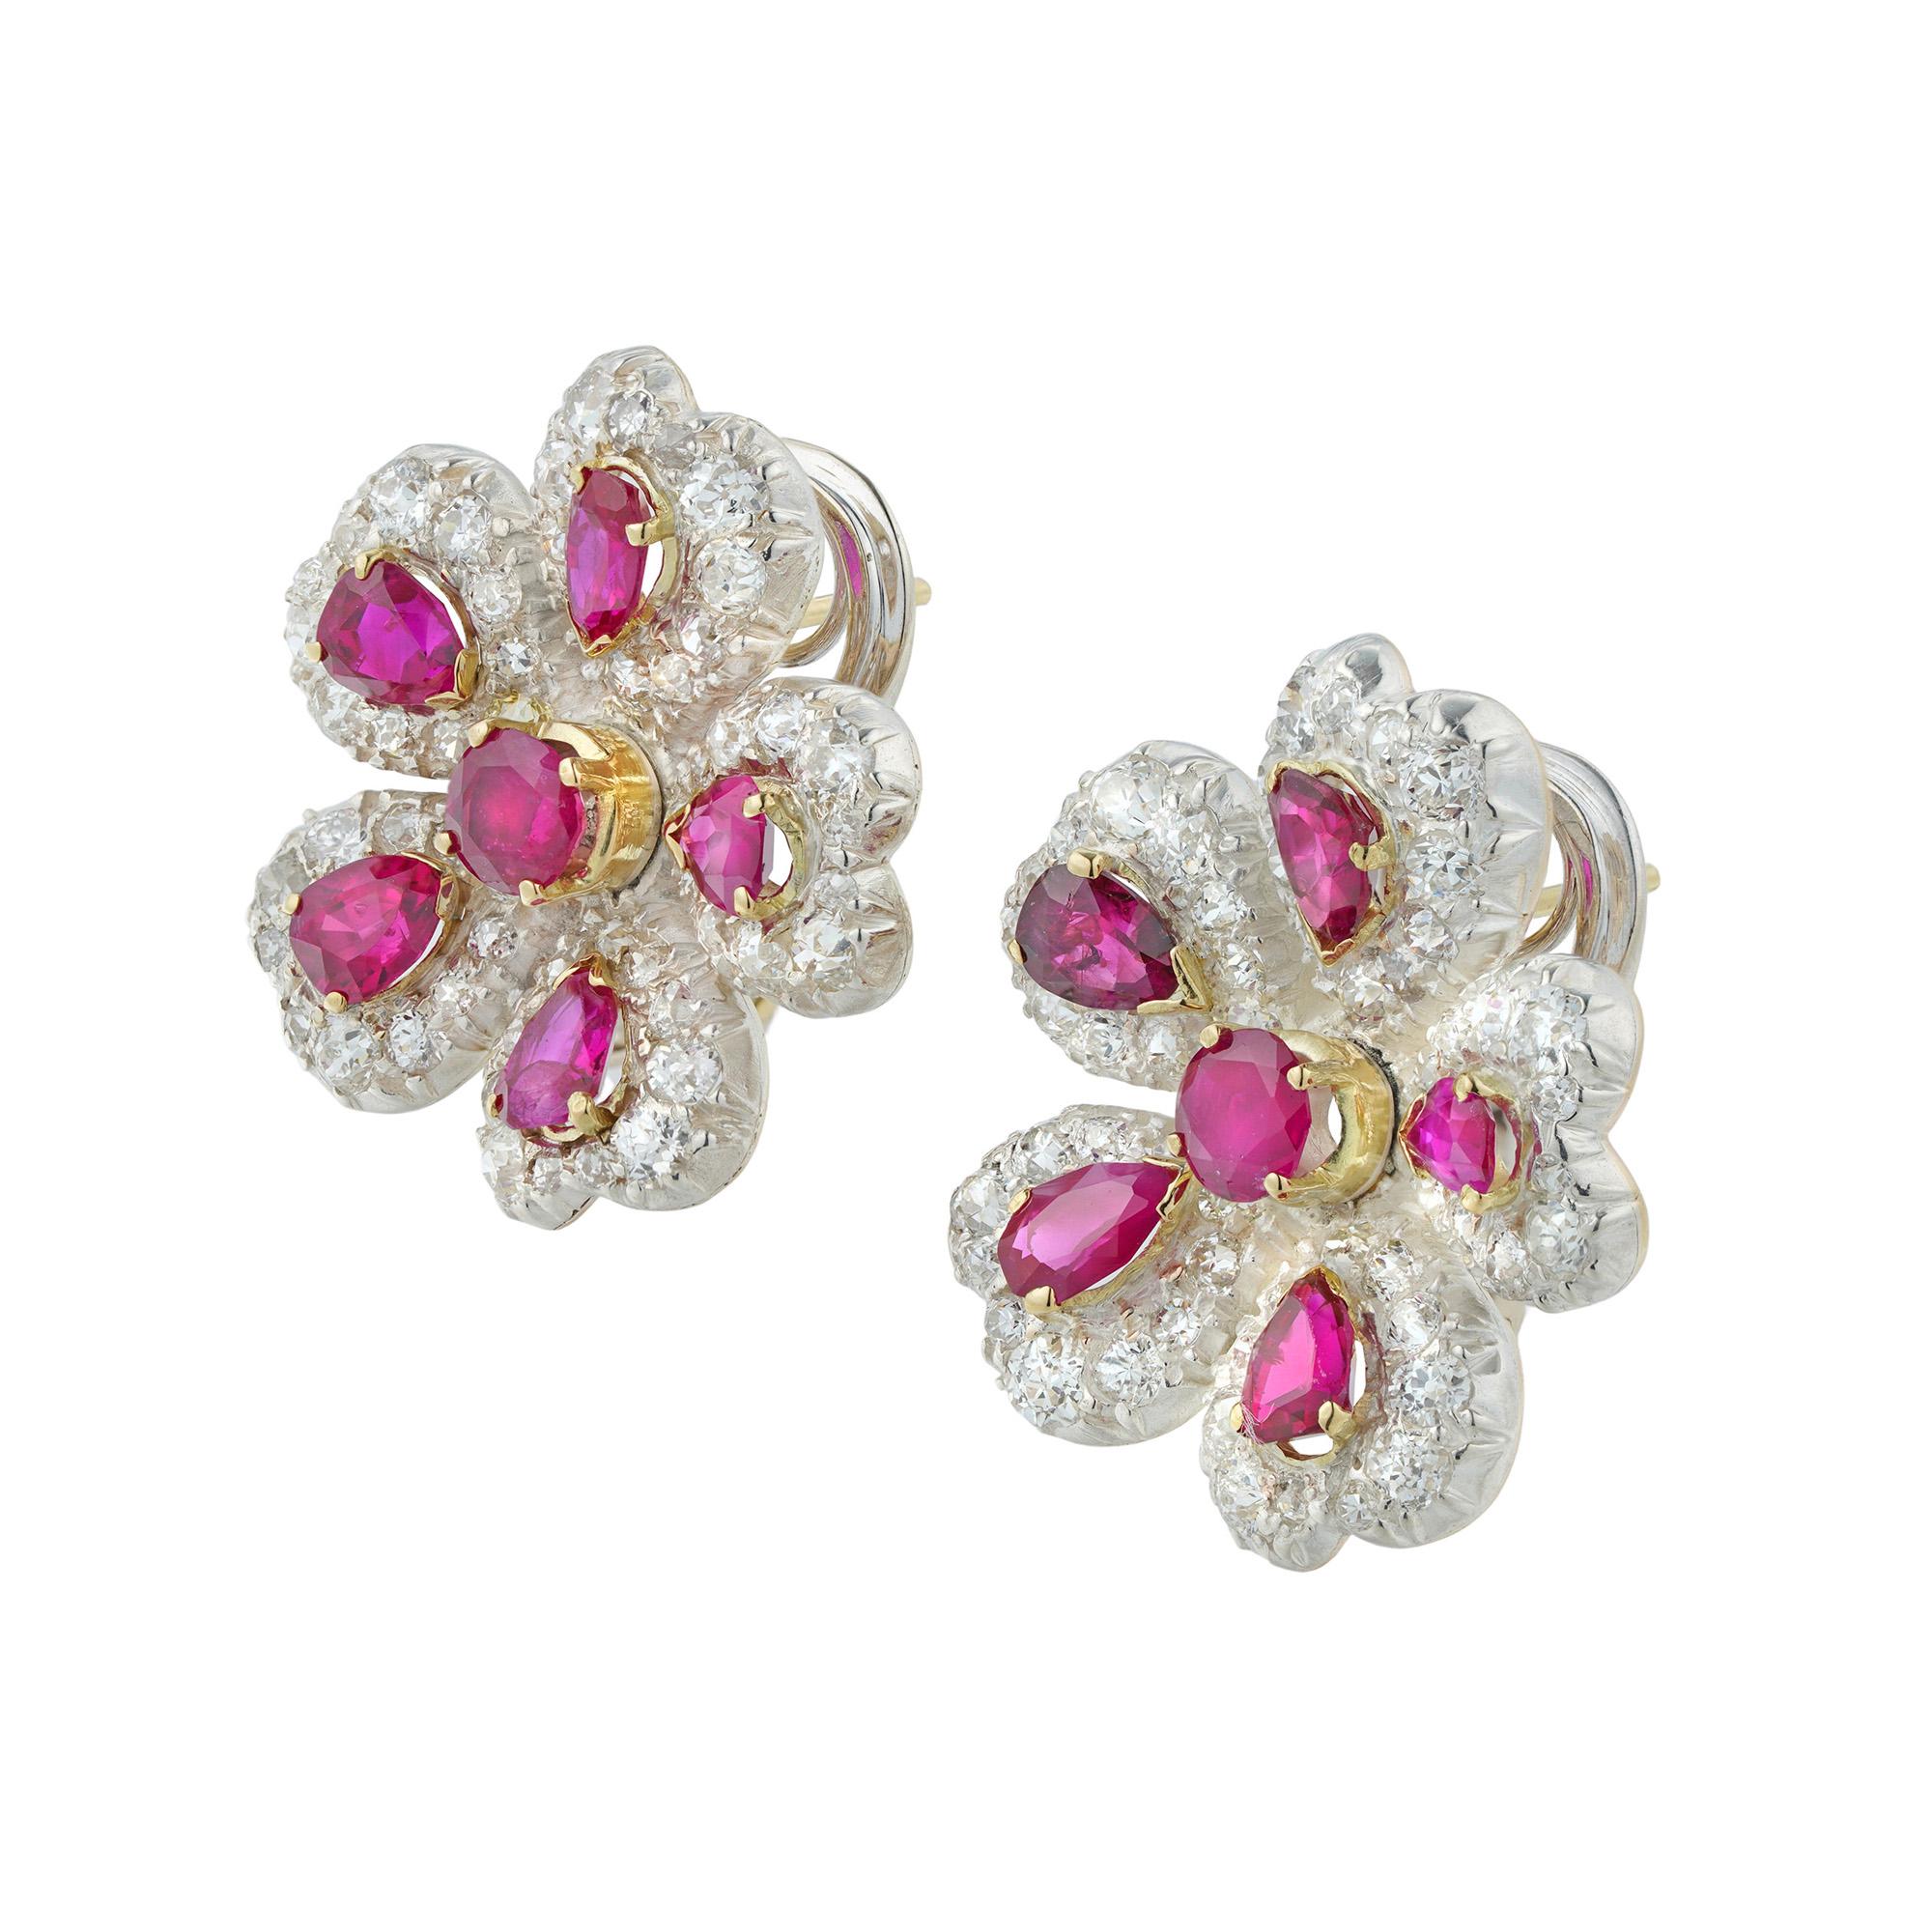 A pair of late Victorian ruby and diamond earrings, each in the form of a flower, centrally-set with a round ruby, surrounded by five petals, each set with a pear-shaped ruby surrounded by old European-cut diamonds, the rubies estimated to weigh 4.2